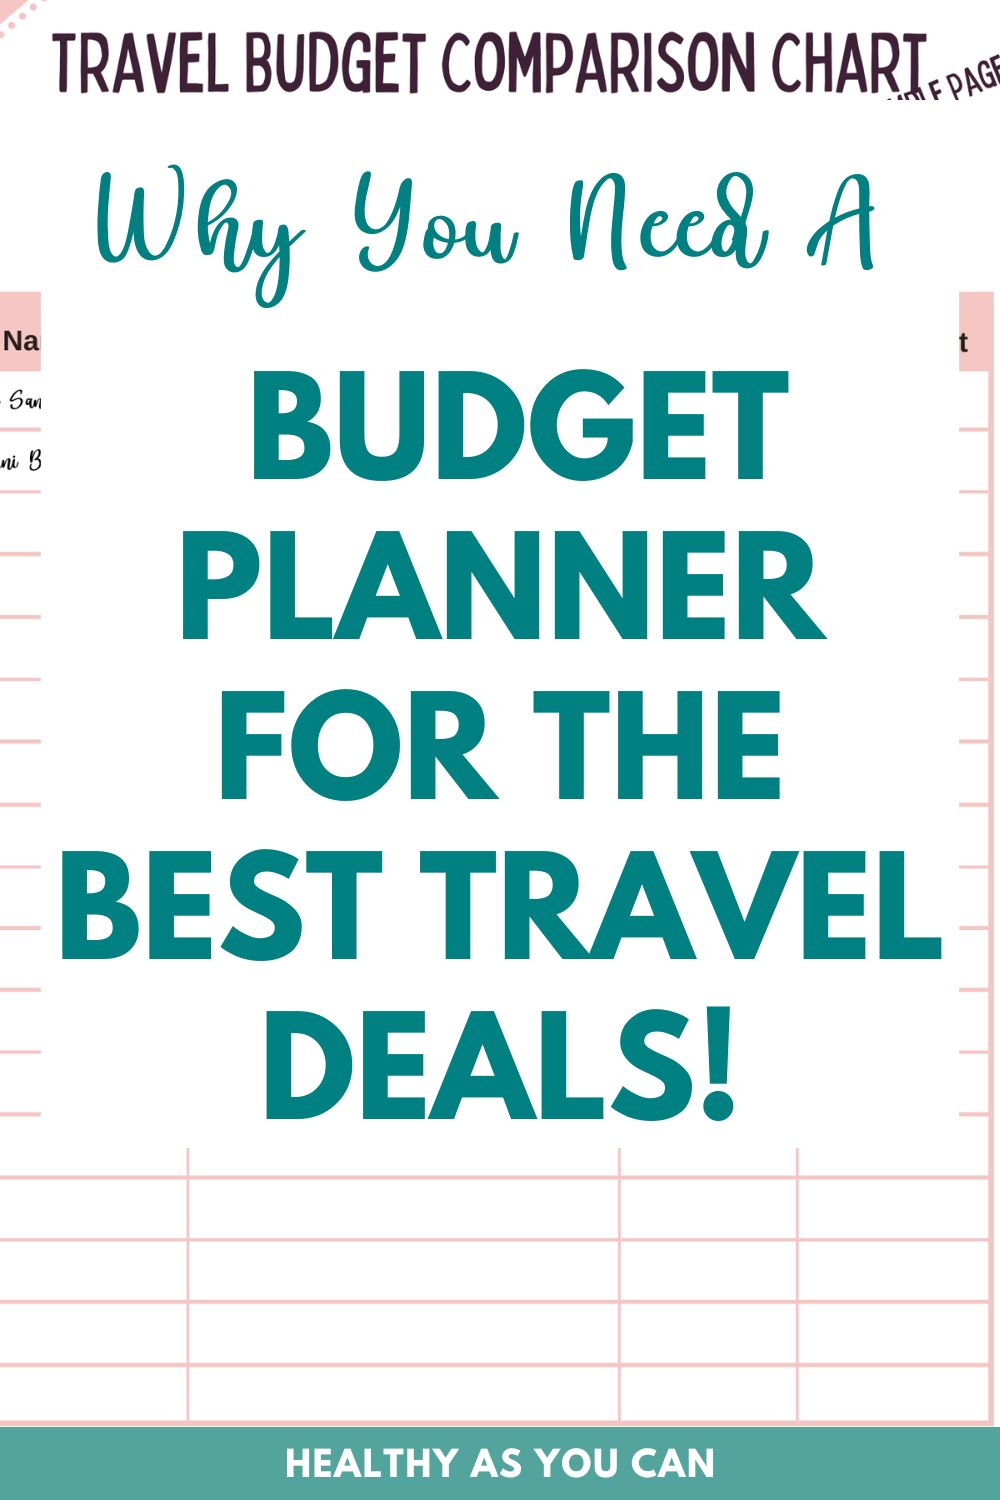 teal letters white square usiing budget planner for best travel deals